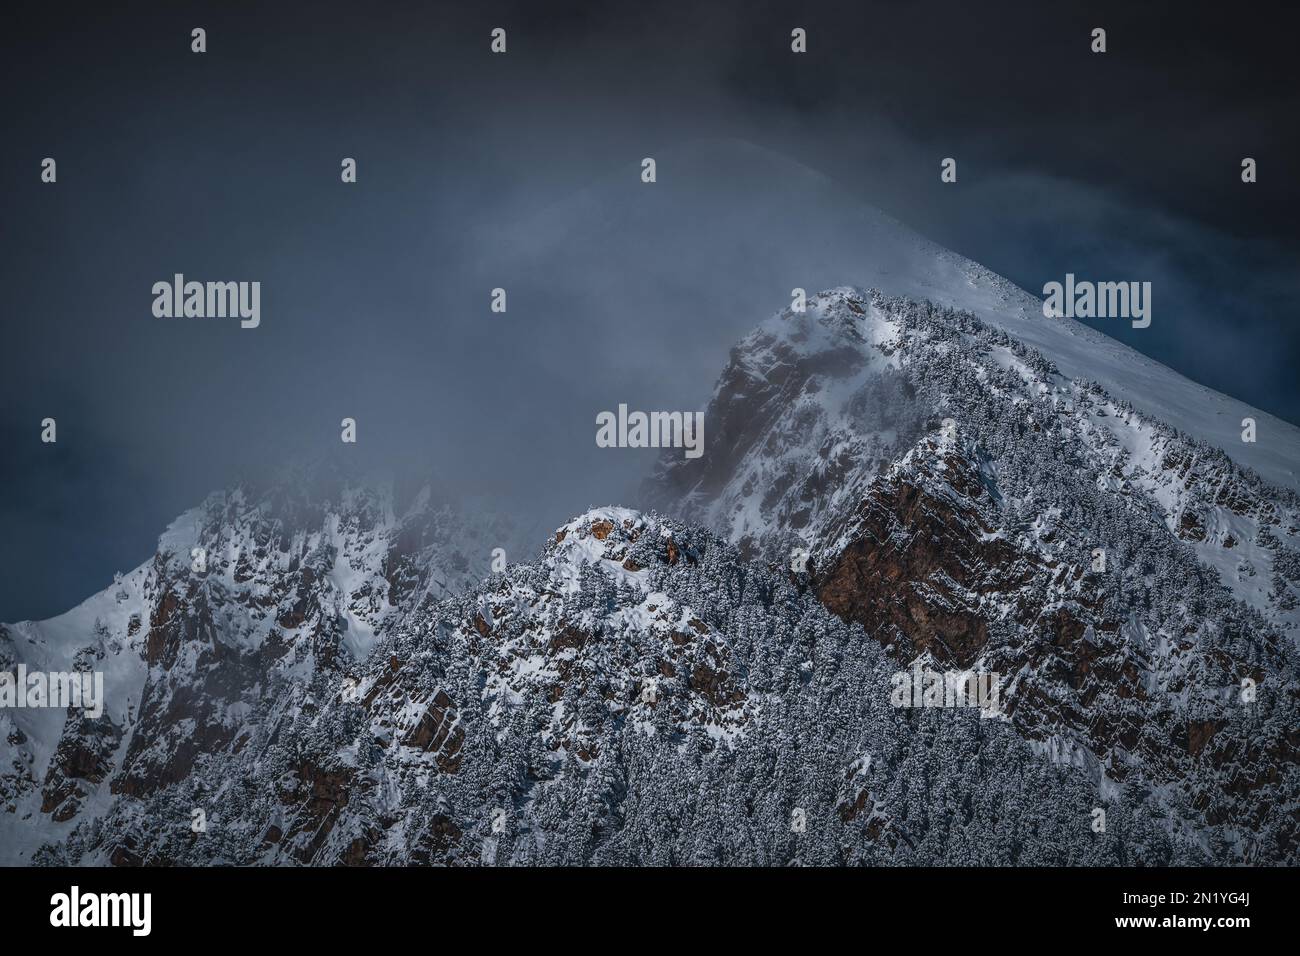 Snowy mountains in a mysterious environment. Fog and black storm clouds cover the mountaintops. Winter landscape, wintertime, snowfall and bad weather Stock Photo